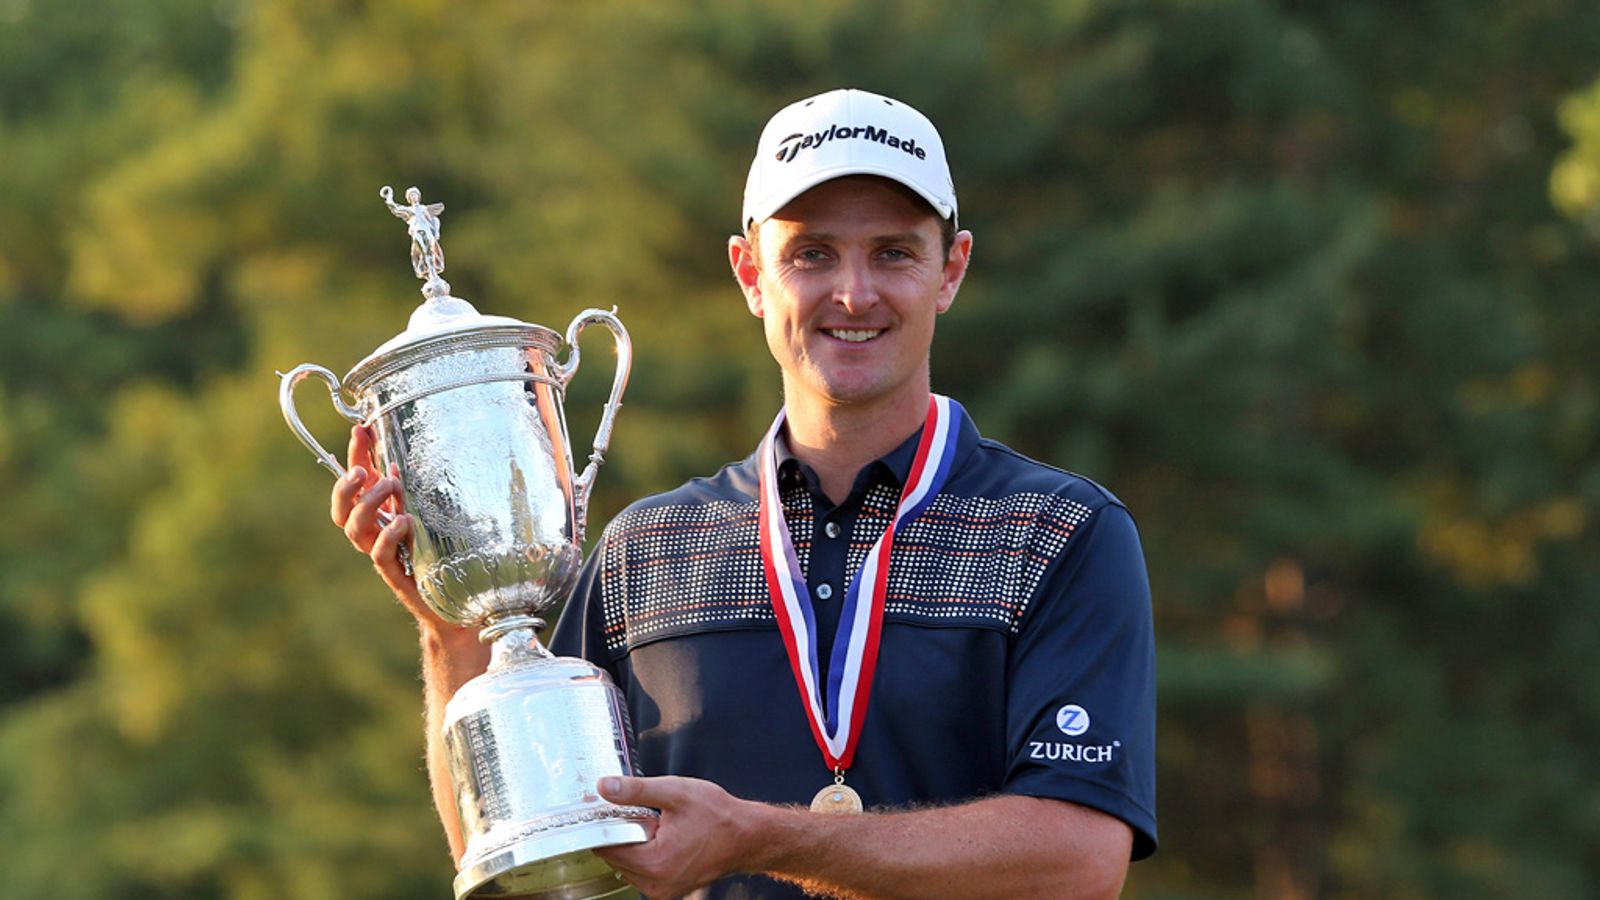 Justin Rose clinches first major with twoshot win in US Open at Merion